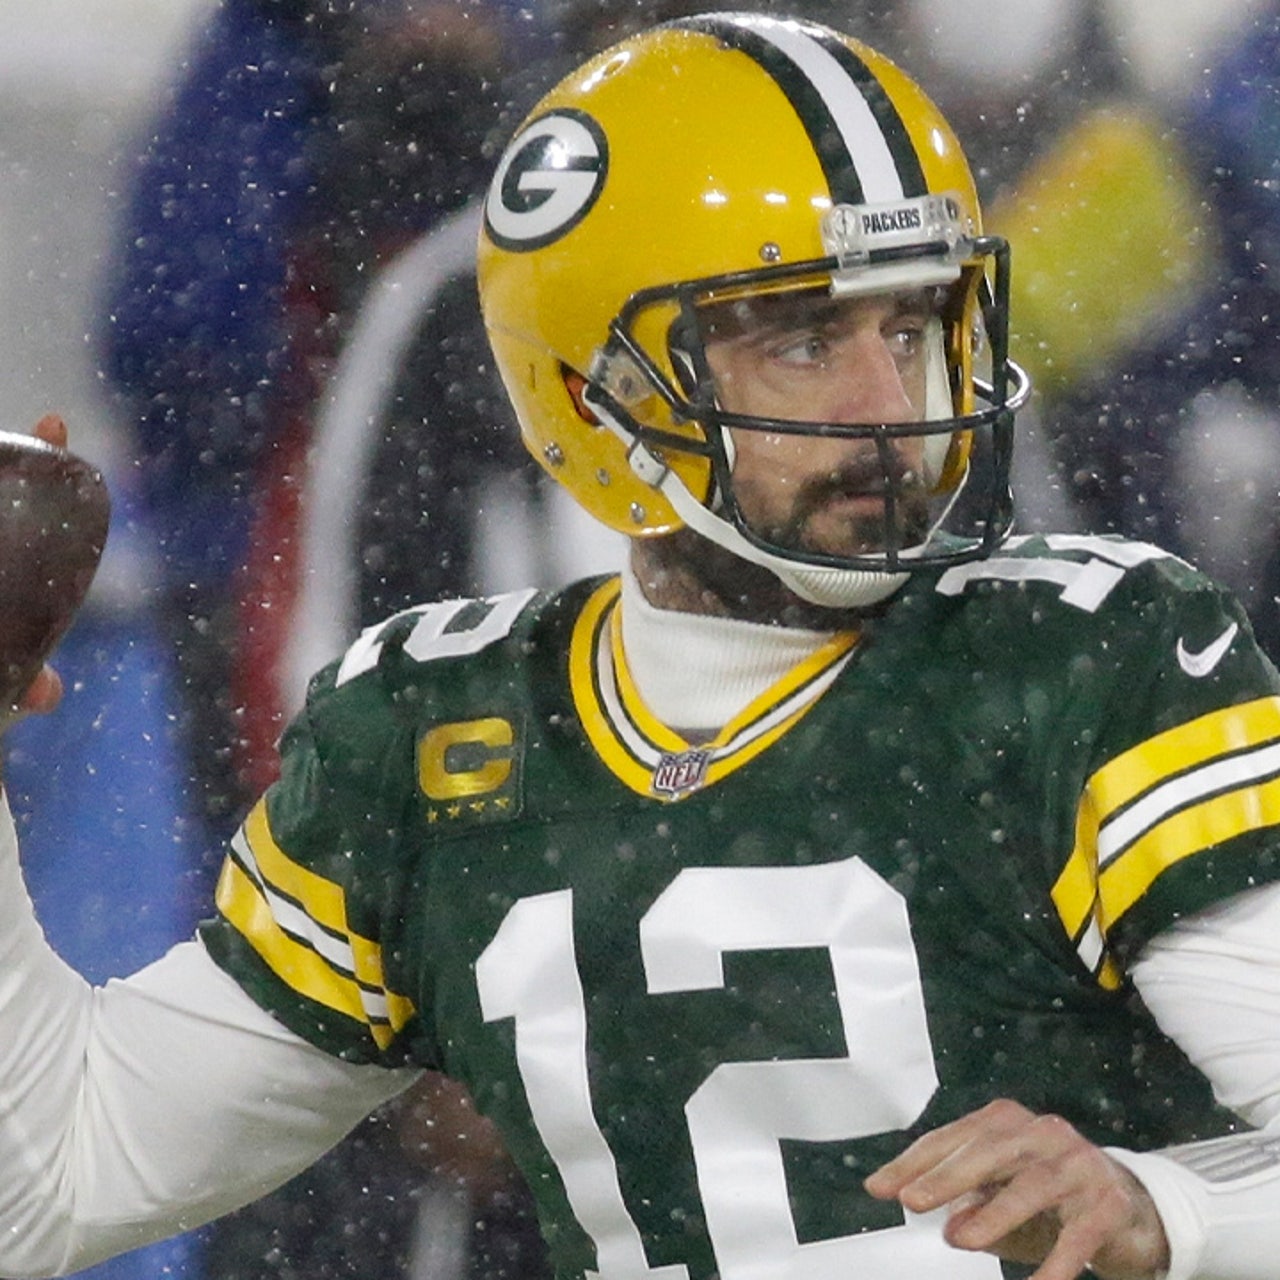 LIVE BLOG: Packers defeat Bears 41-25